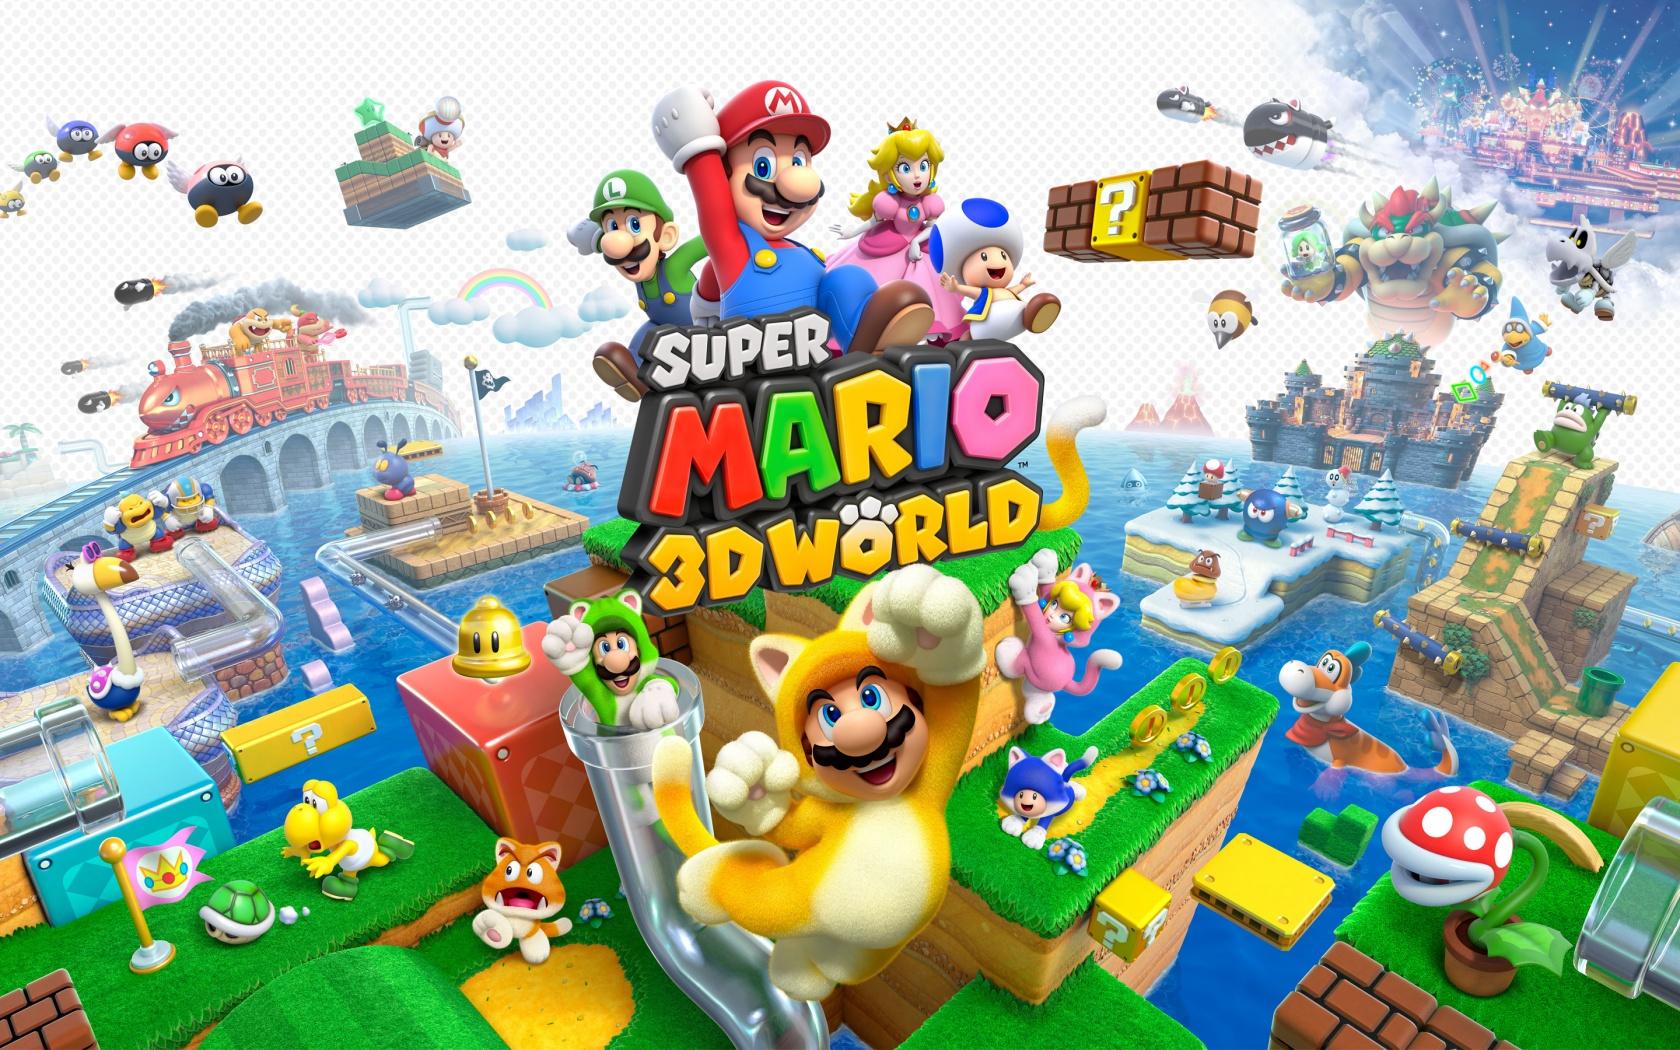 Super Mario 3D World Wallpapers in jpg format for free download